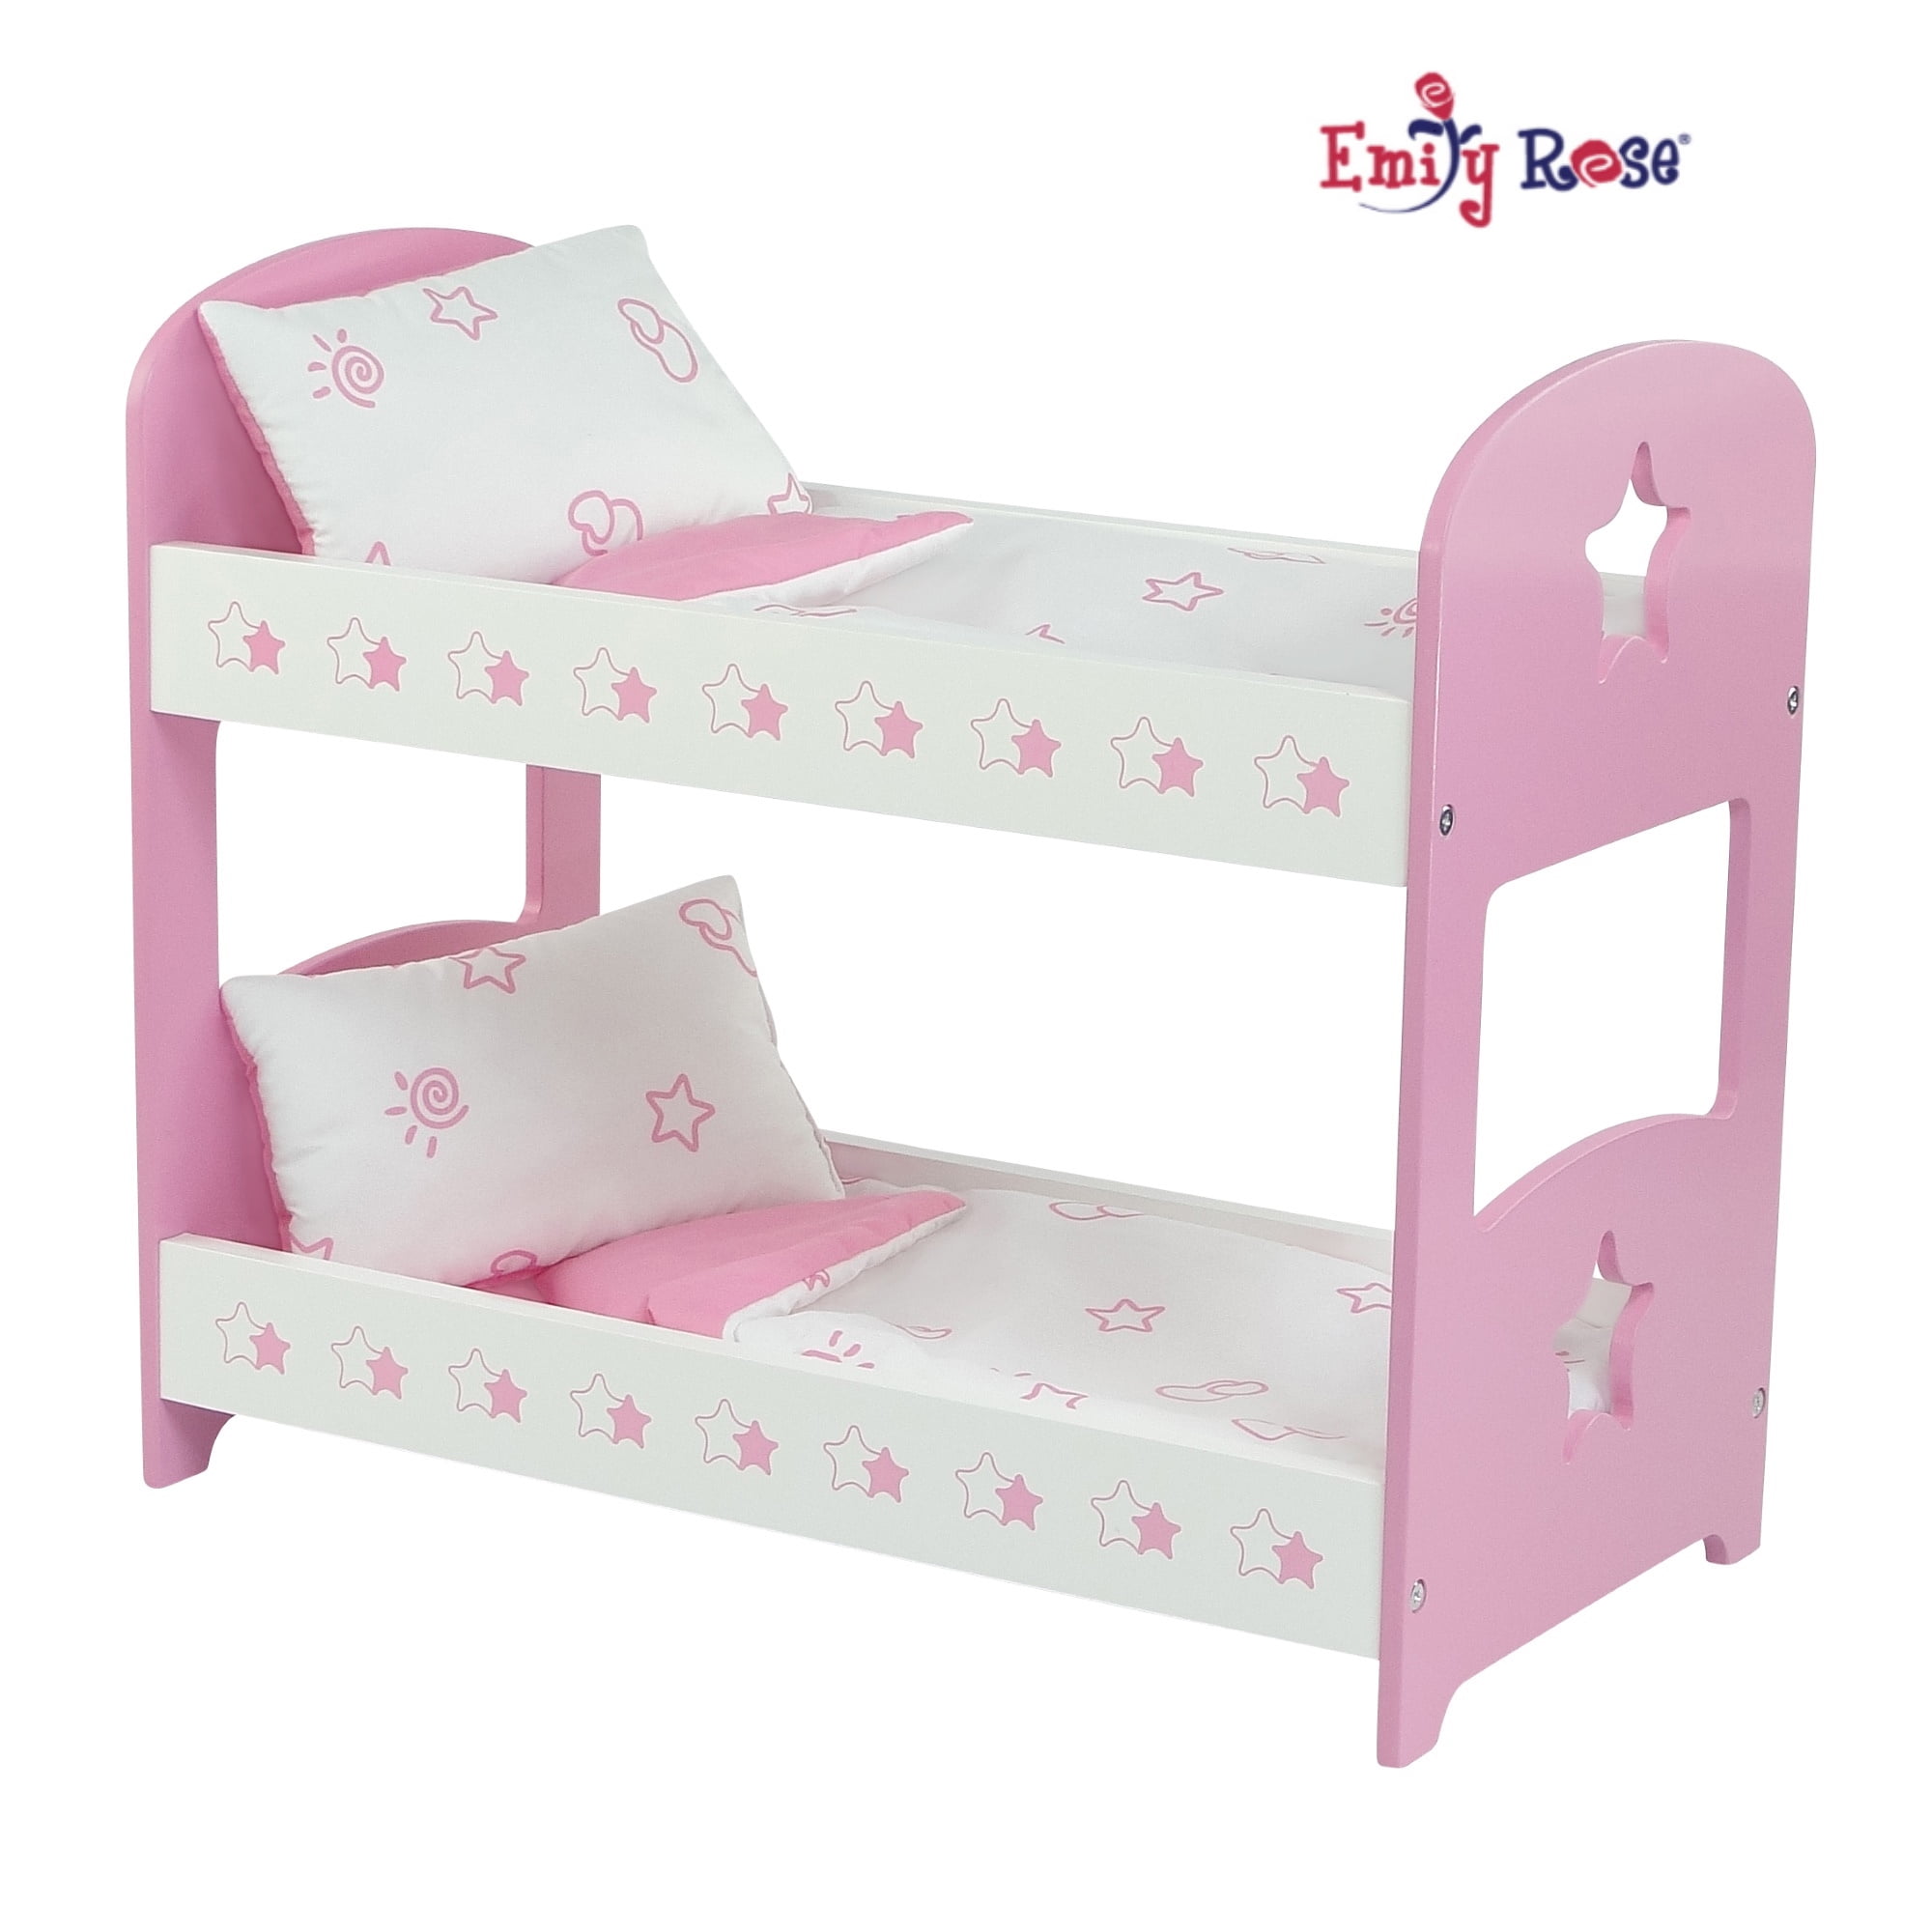 18 Inch Doll Bunk Bed Furniture, Wooden Toy Bunk Beds